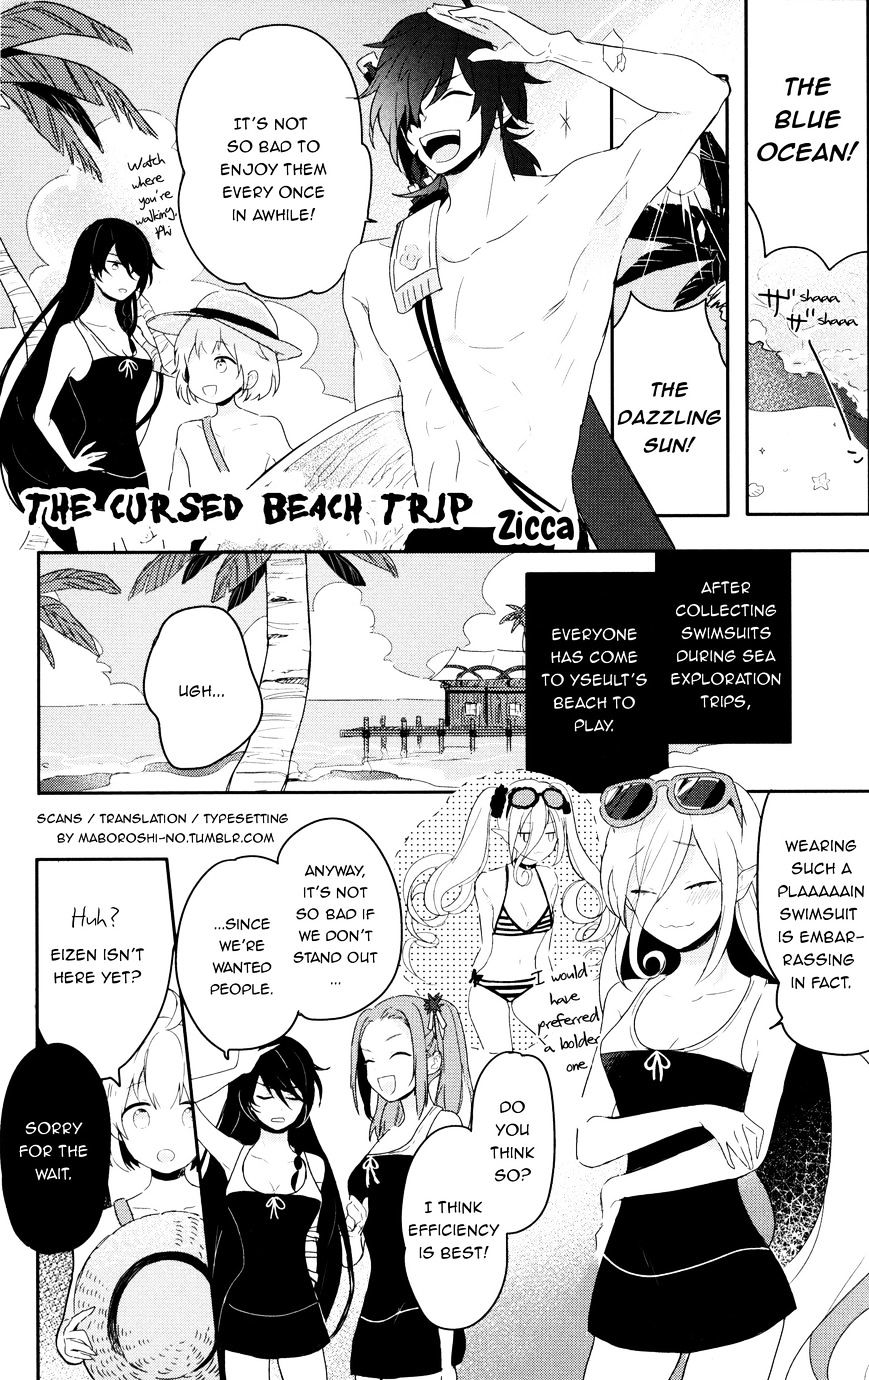 Tales Of Berseria Comic Anthology - Page 1